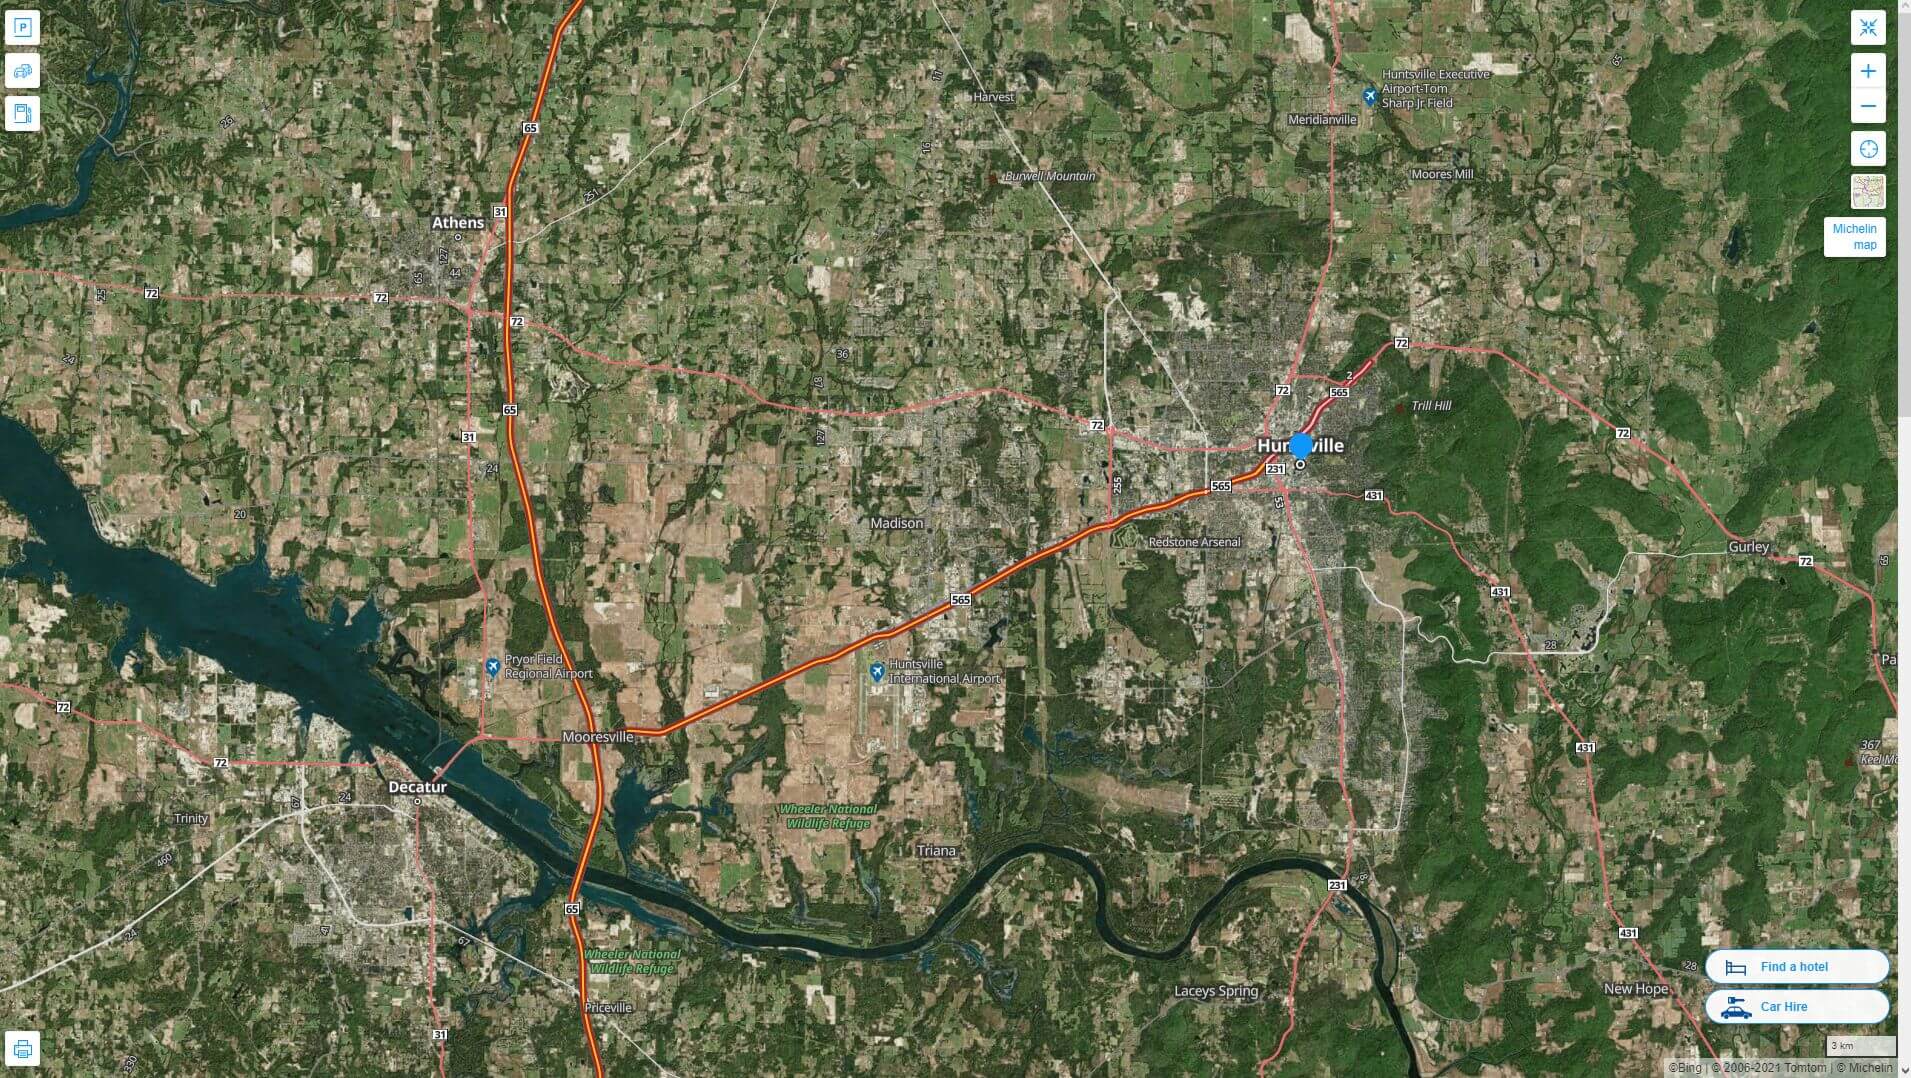 Huntsville Alabama Highway and Road Map with Satellite View